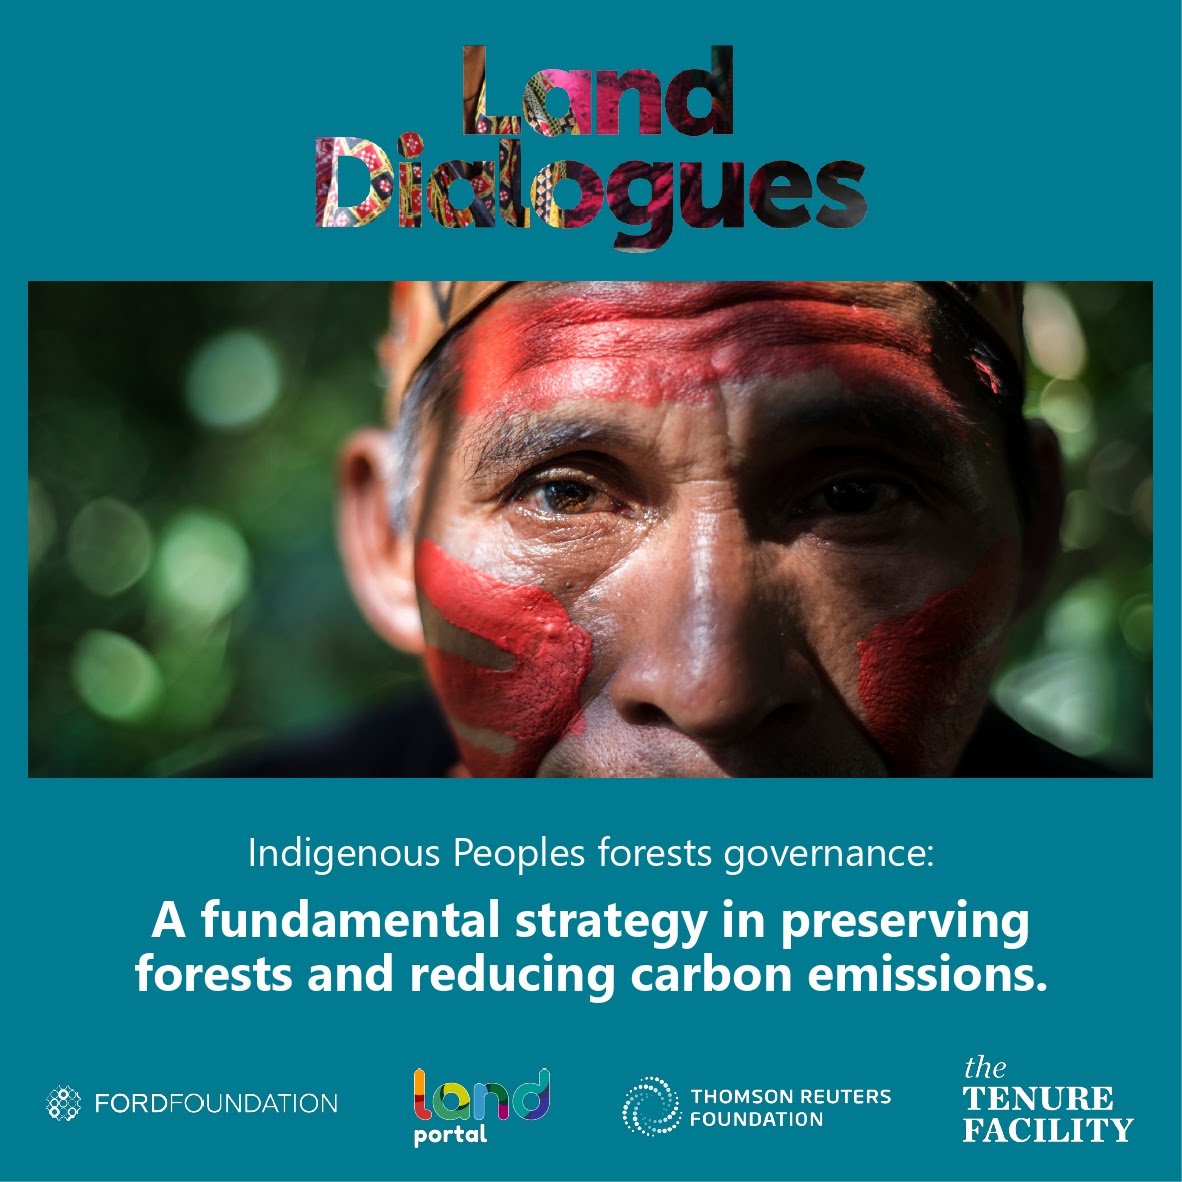 Indigenous Peoples forests governance: a fundamental strategy in preserving forests and reducing carbon emissions